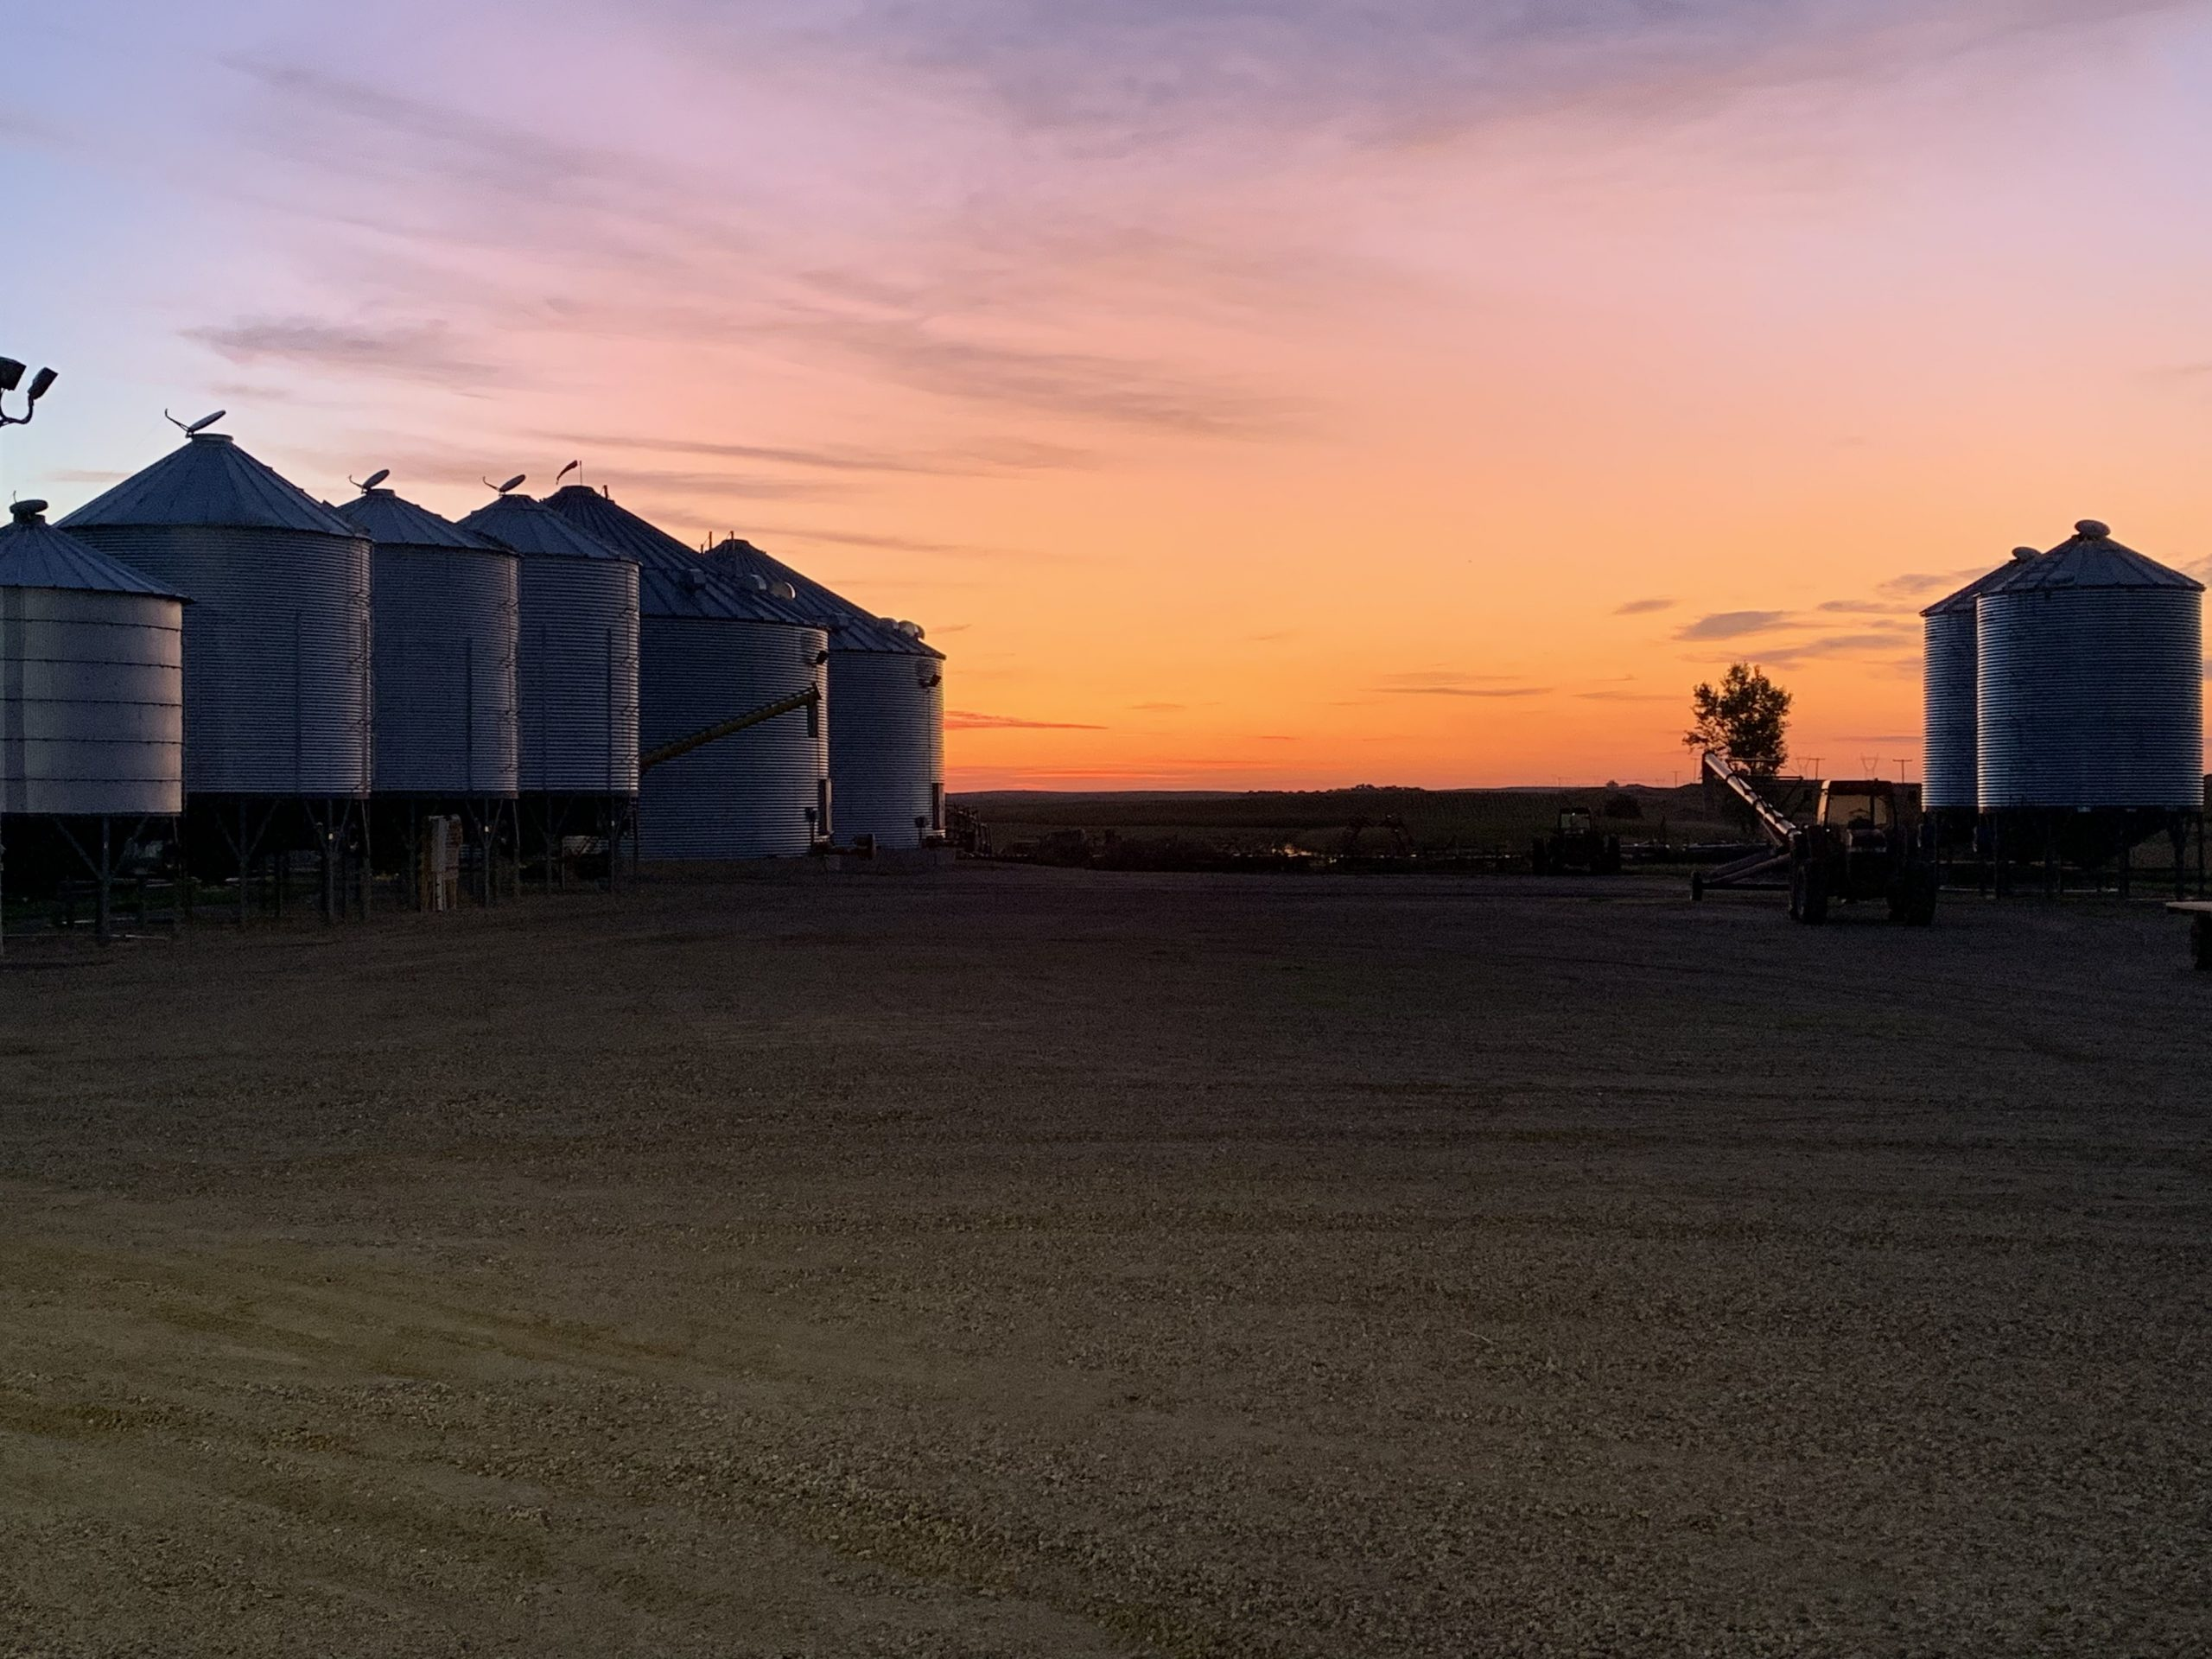 Afternoon Ag News, June 7, 2021: Ag Groups call on Congressional Leaders to Resist New Tax Burdens